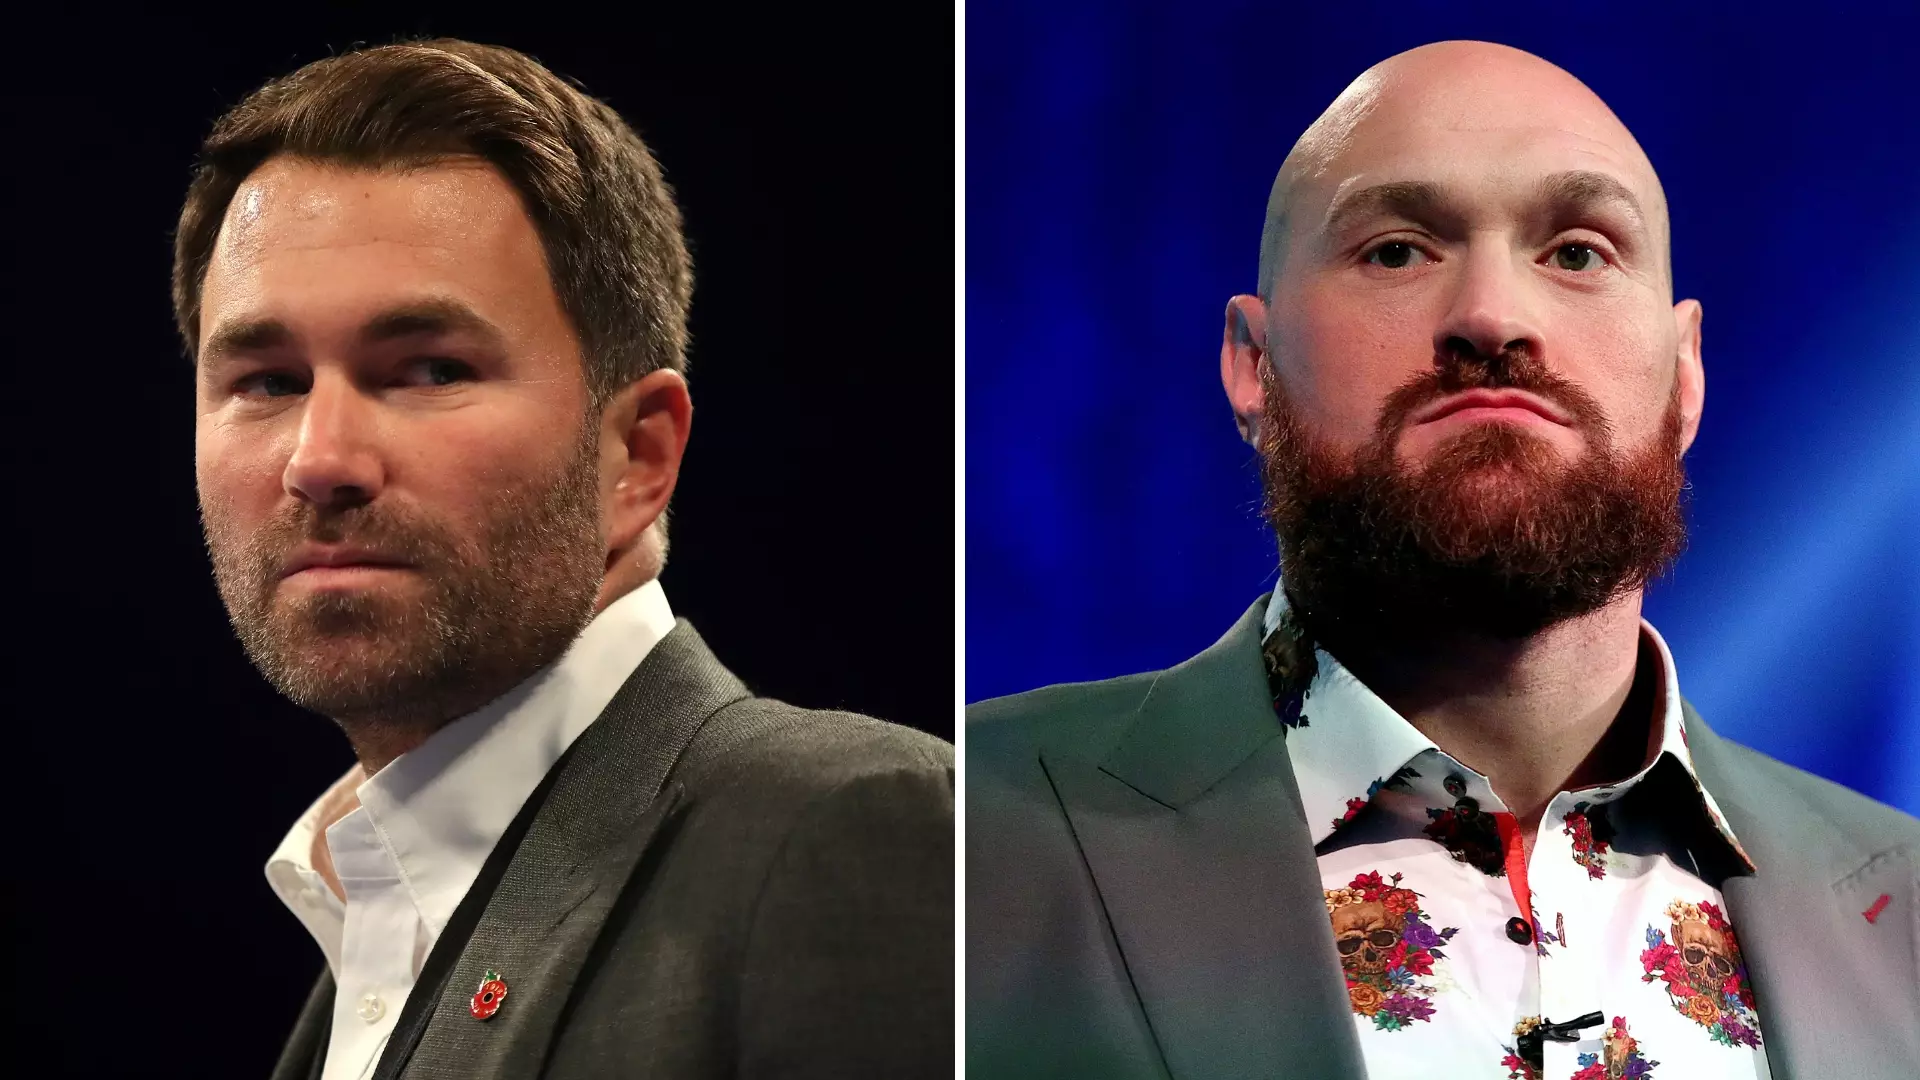 Eddie Hearn Makes A Desperate Plea With Tyson Fury Over Deontay Wilder Fight